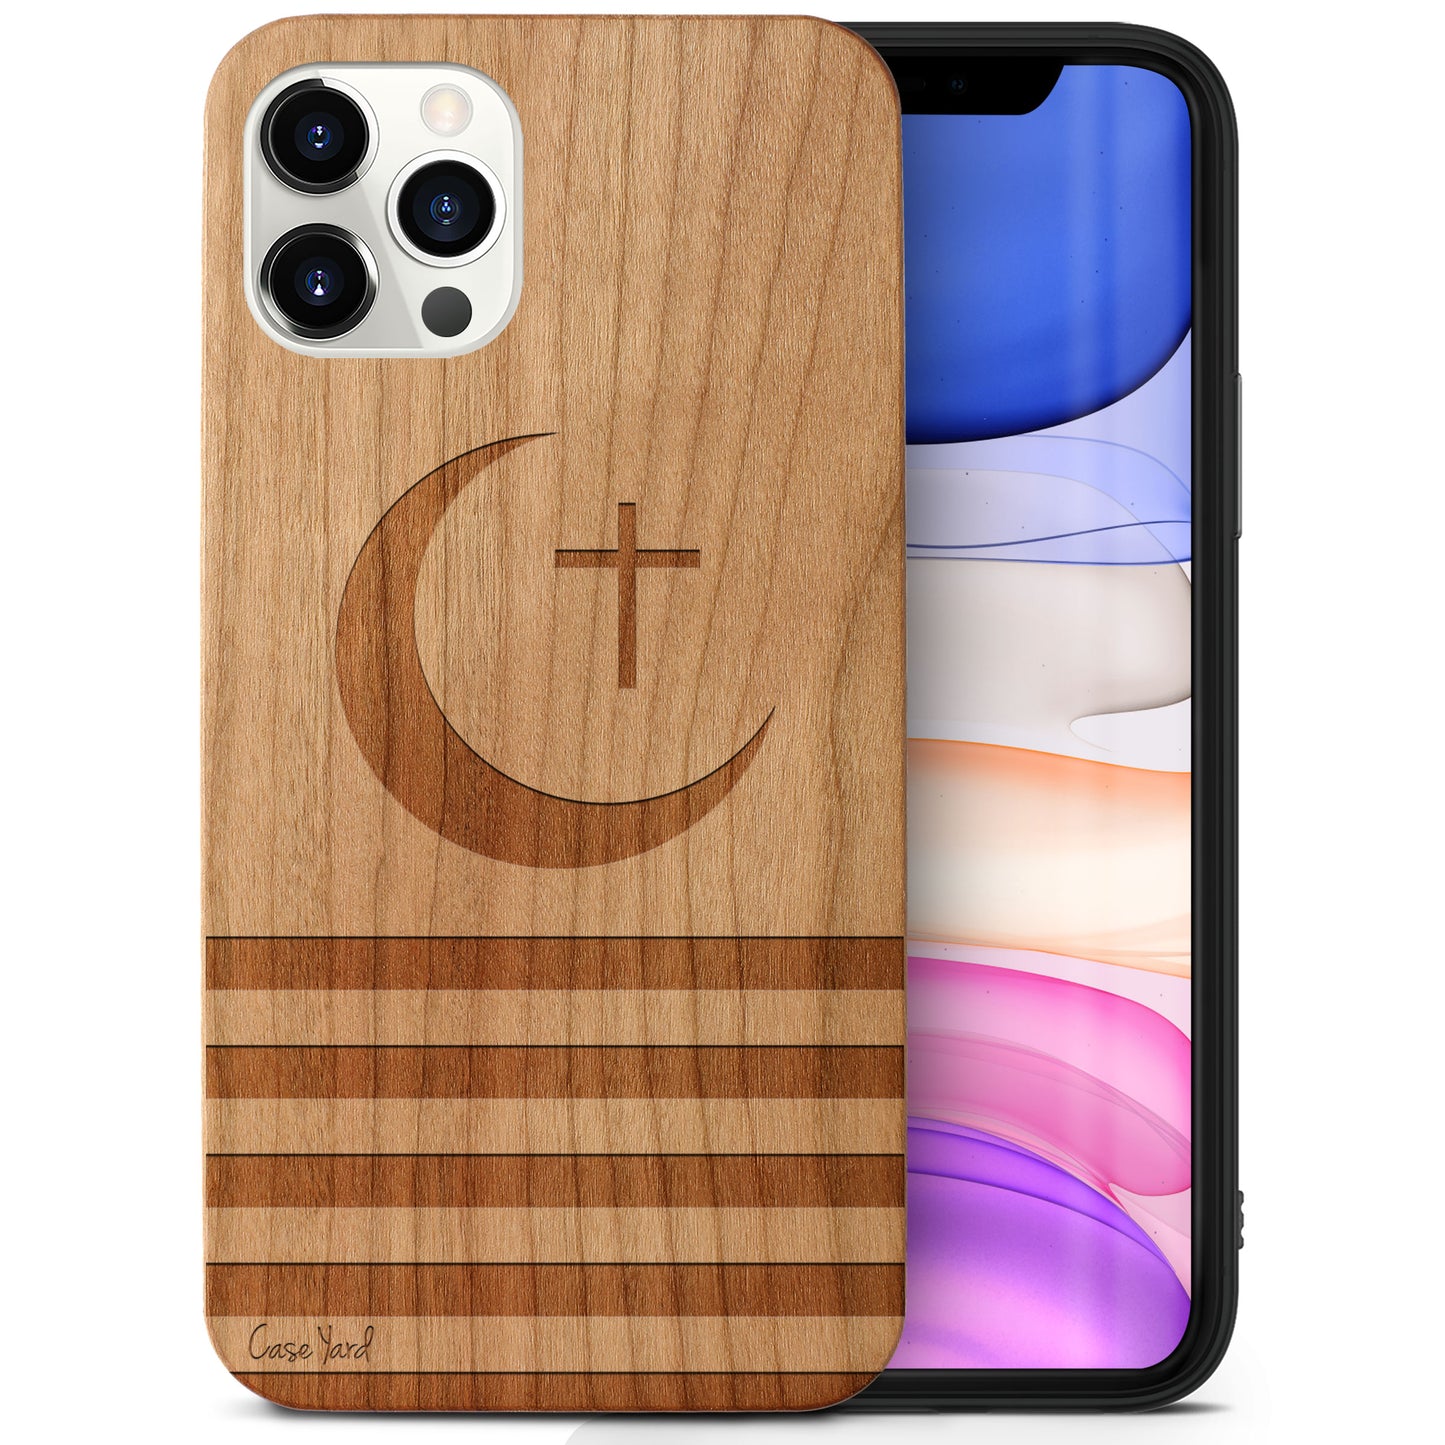 Wooden Cell Phone Case Cover, Laser Engraved case for iPhone & Samsung phone Cressent Moon Design